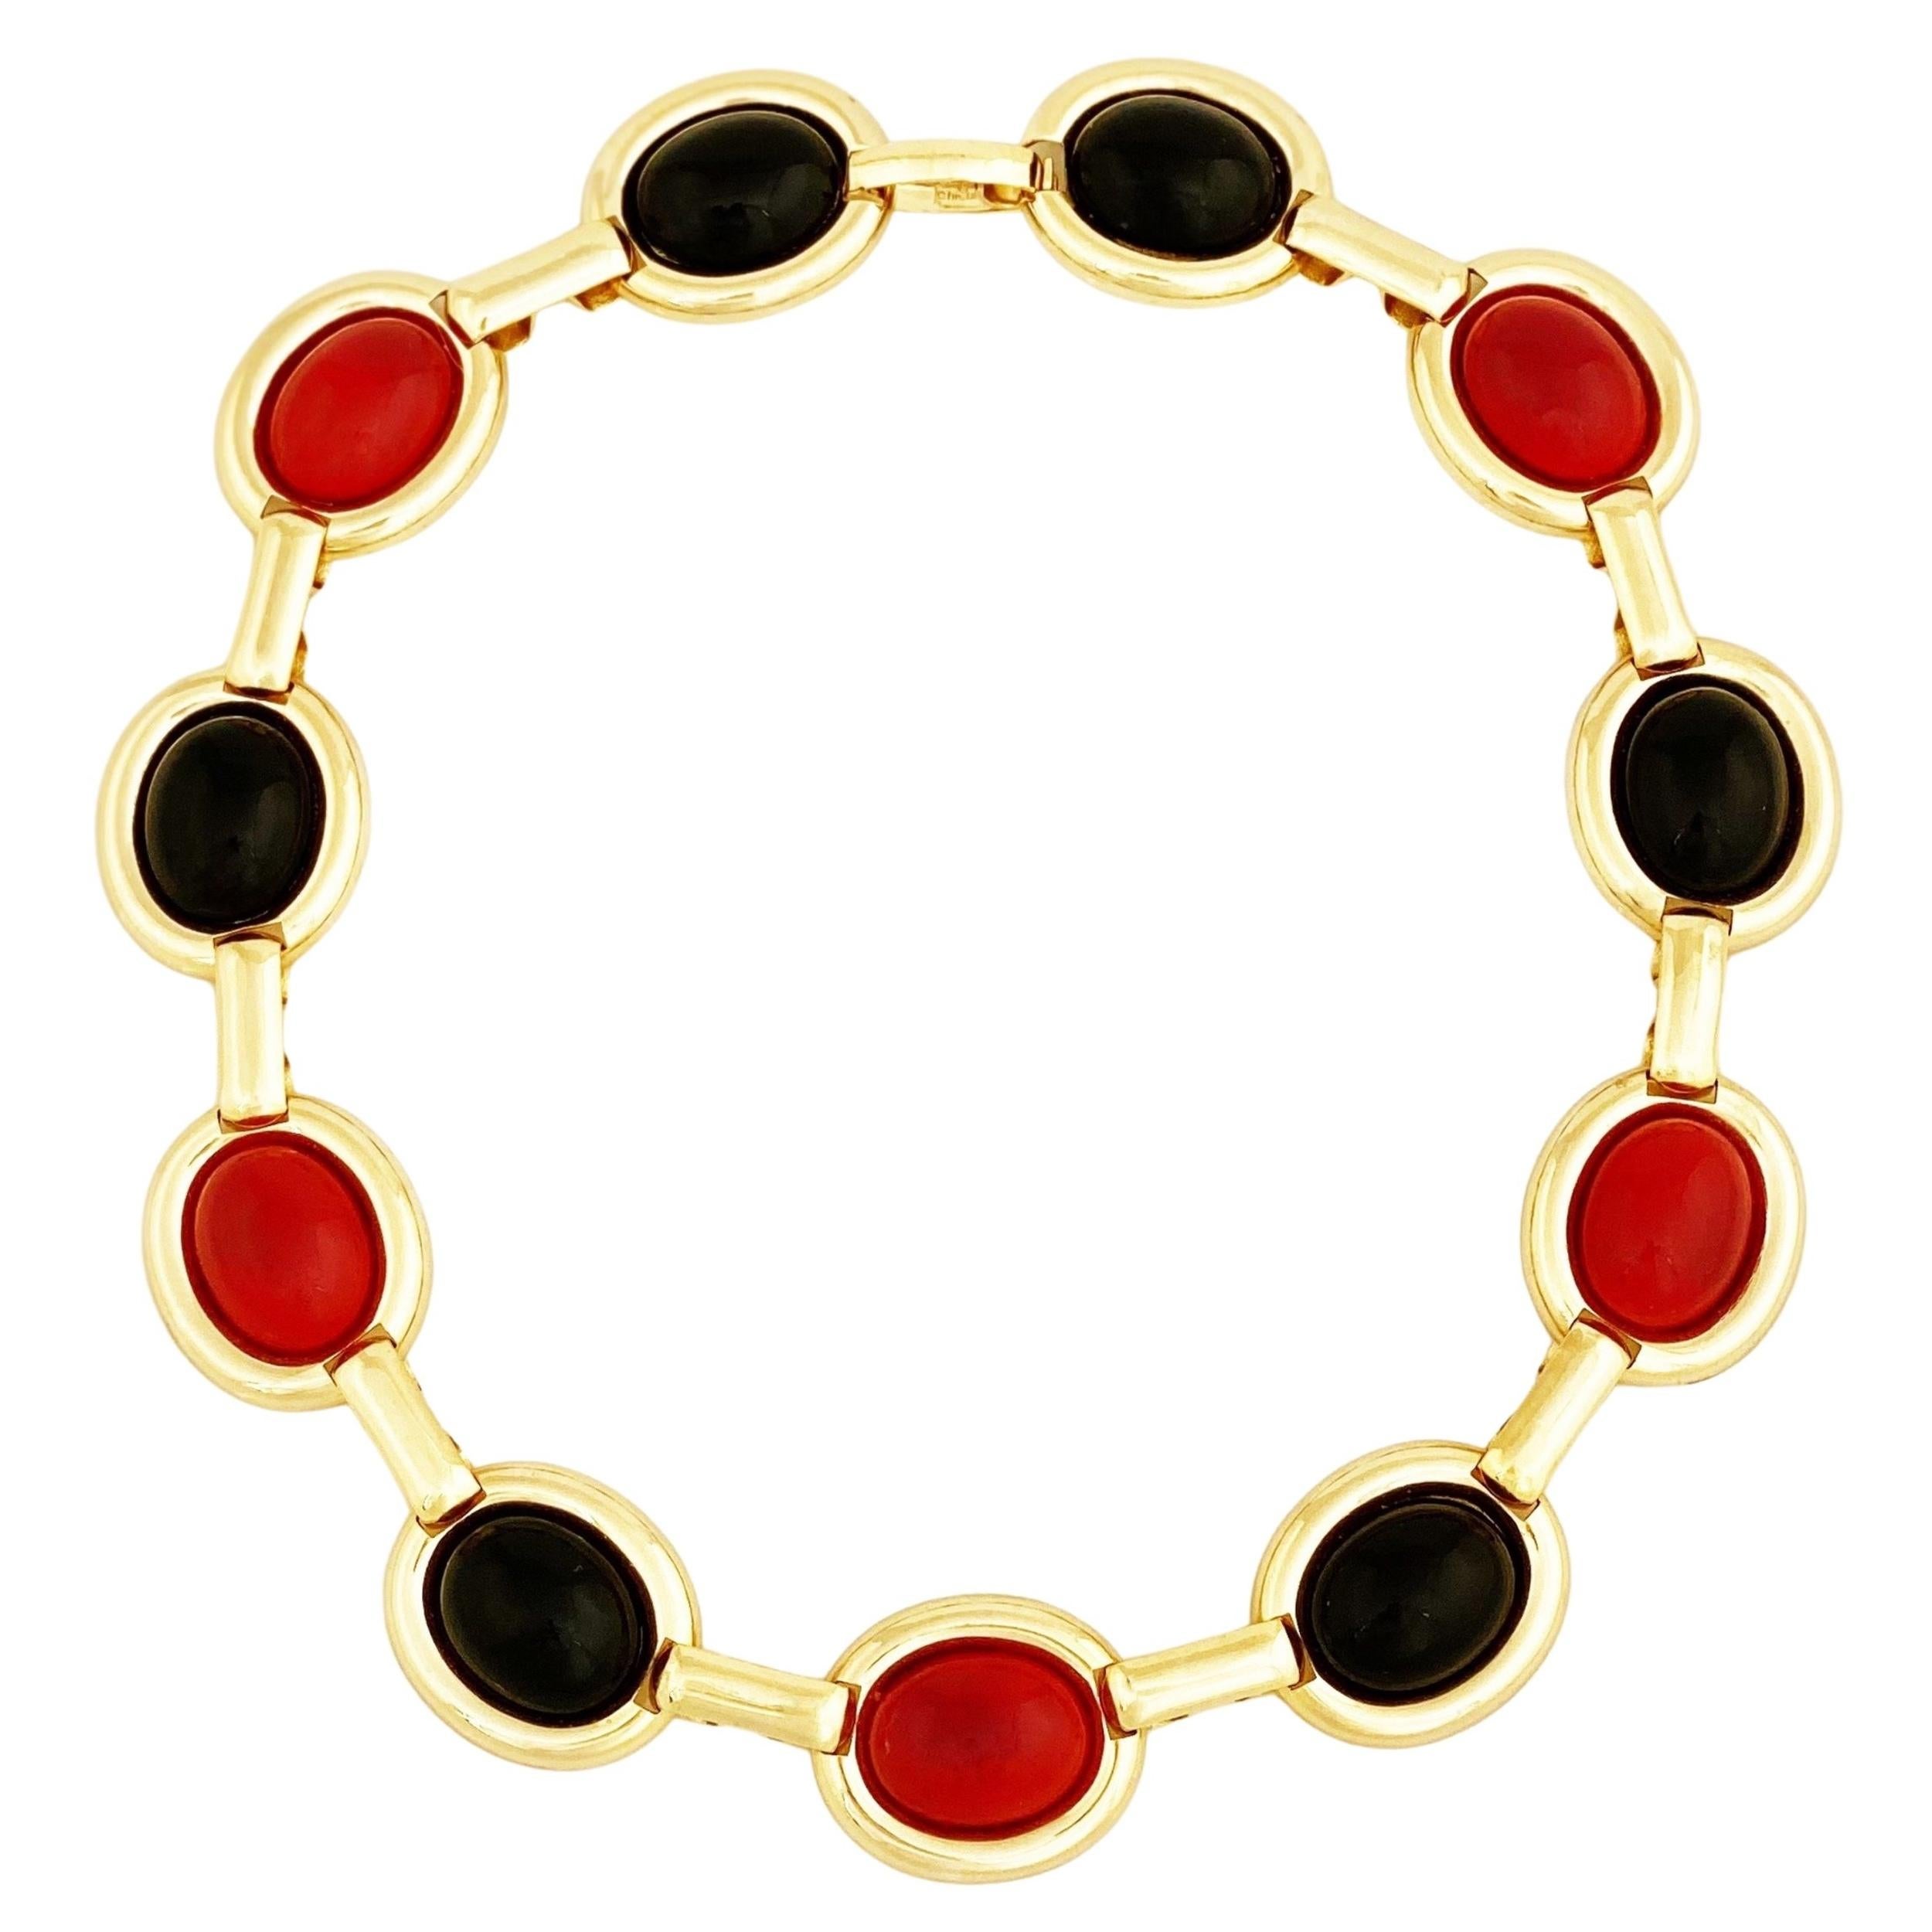 Black & Red Oval Cabochon Link Choker Necklace by Christian Dior, 1980s